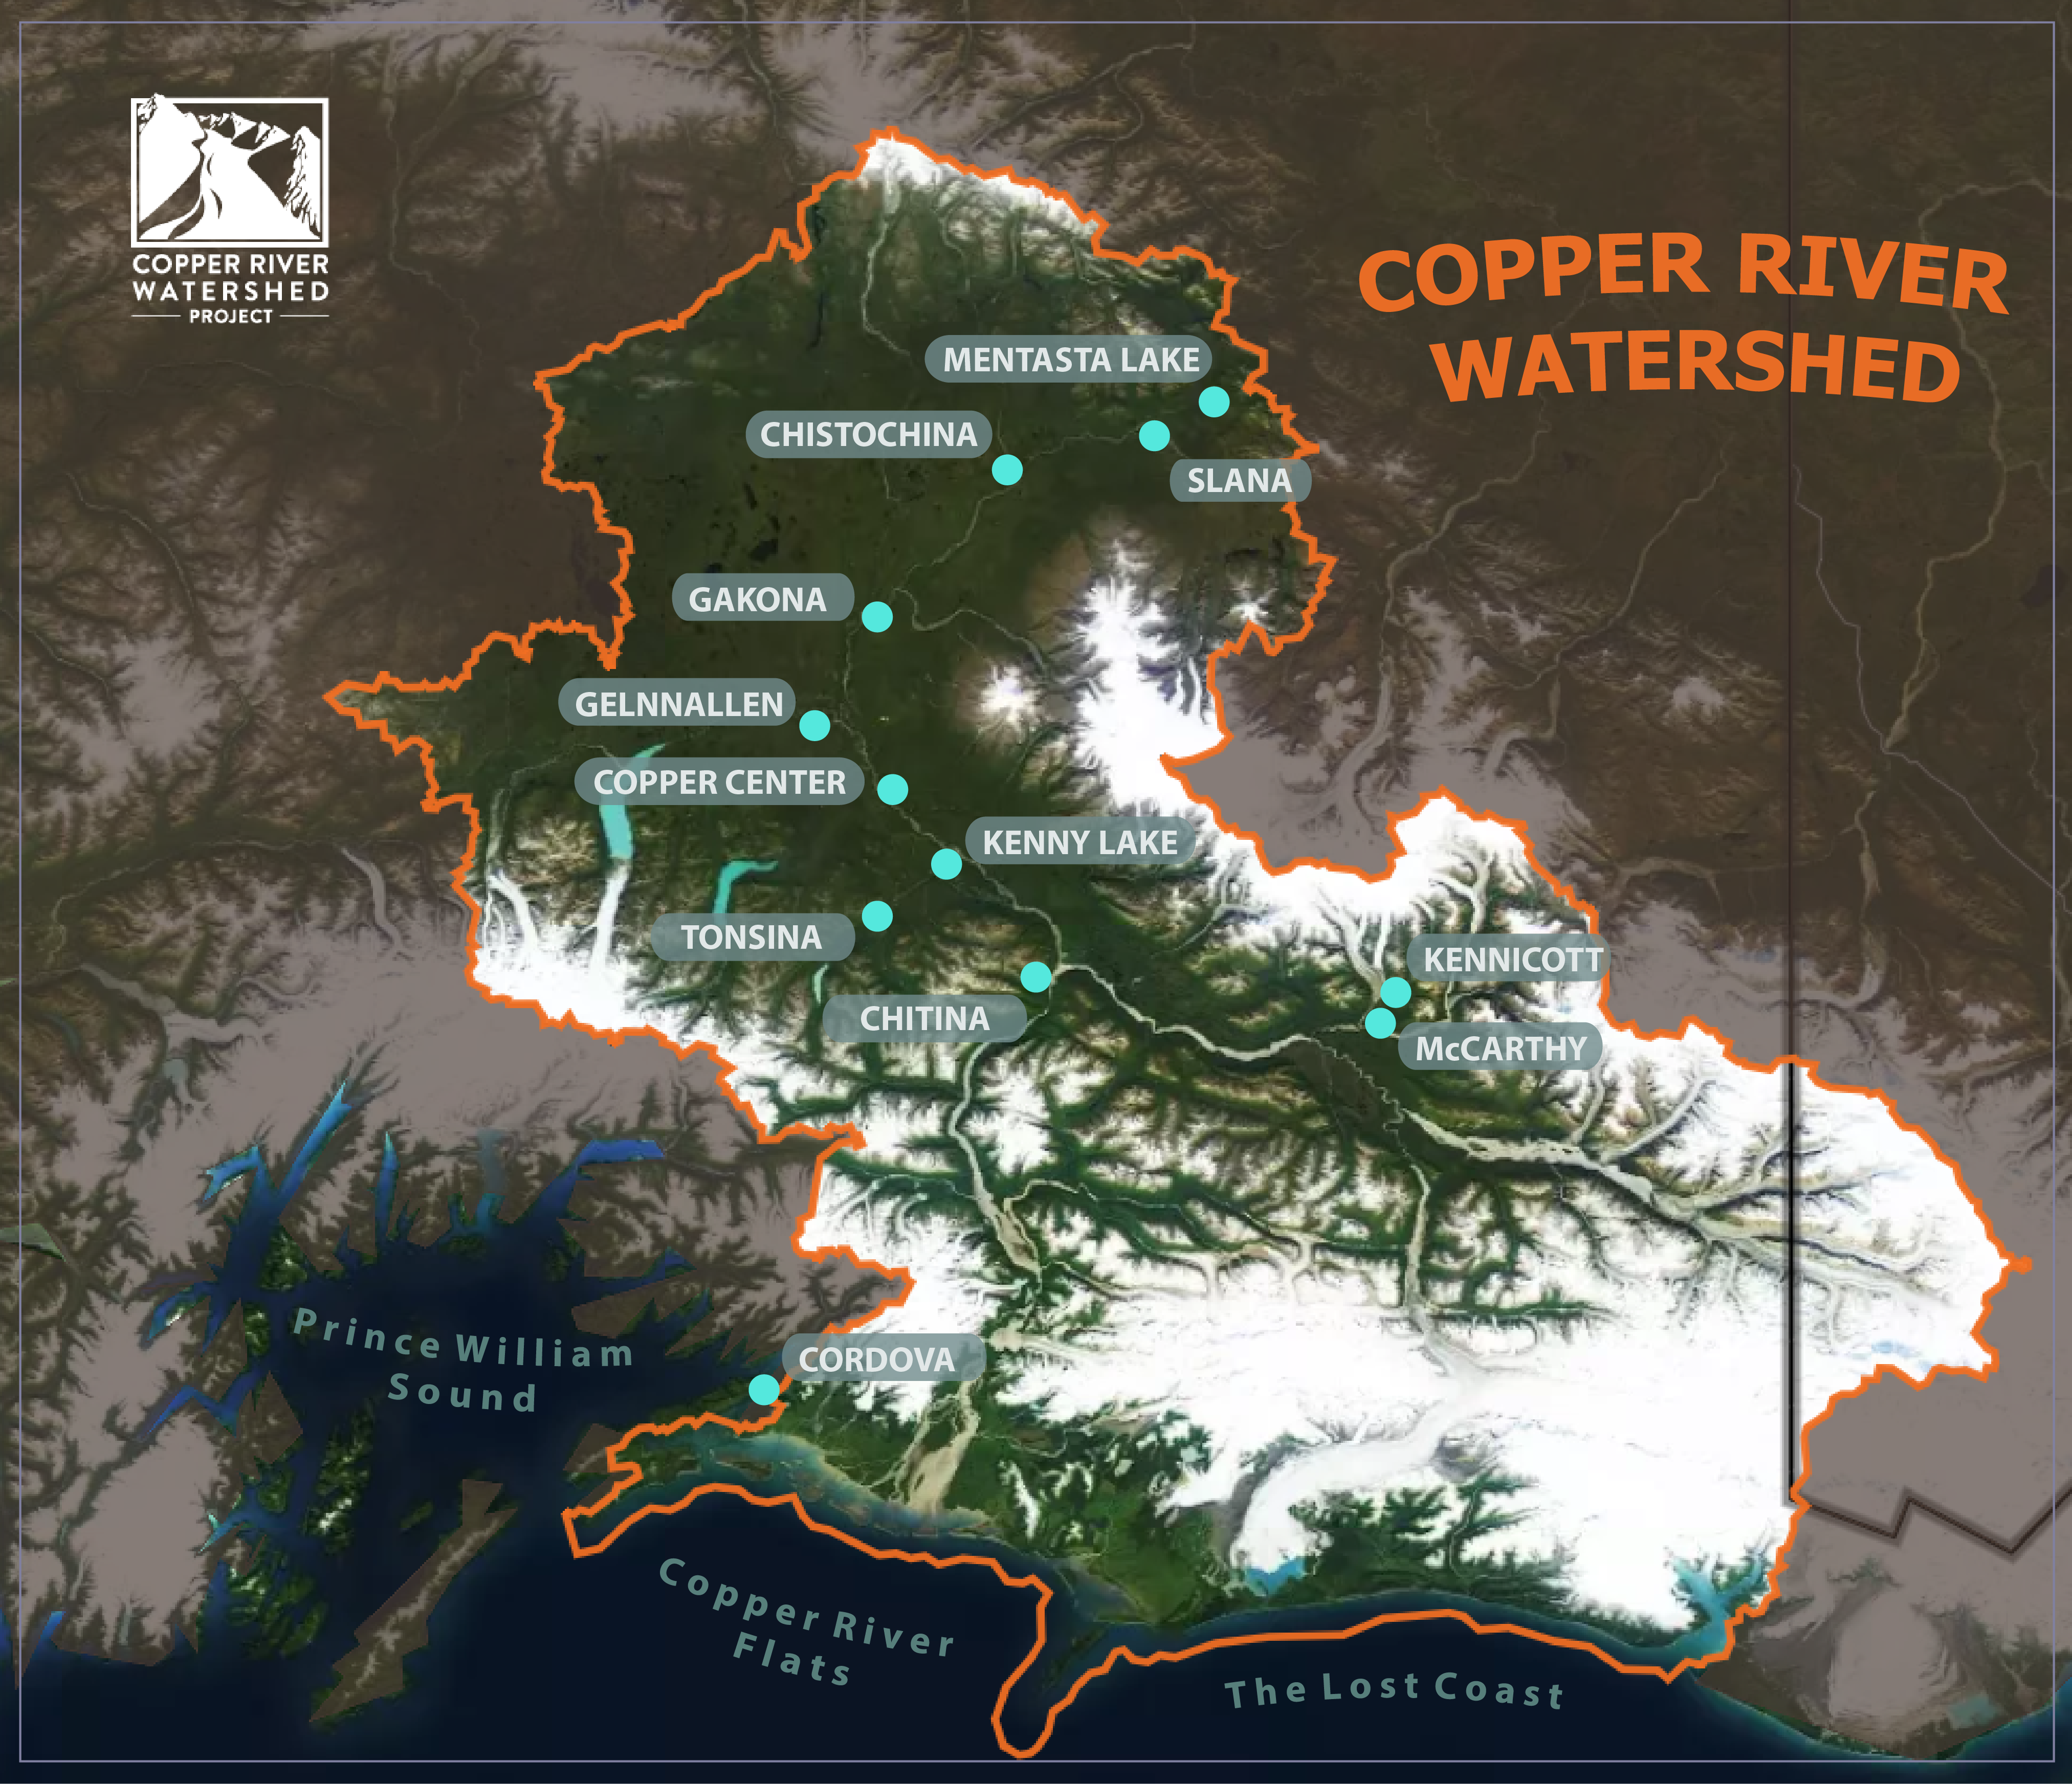 The Copper River Watershed Copper River Watershed Project